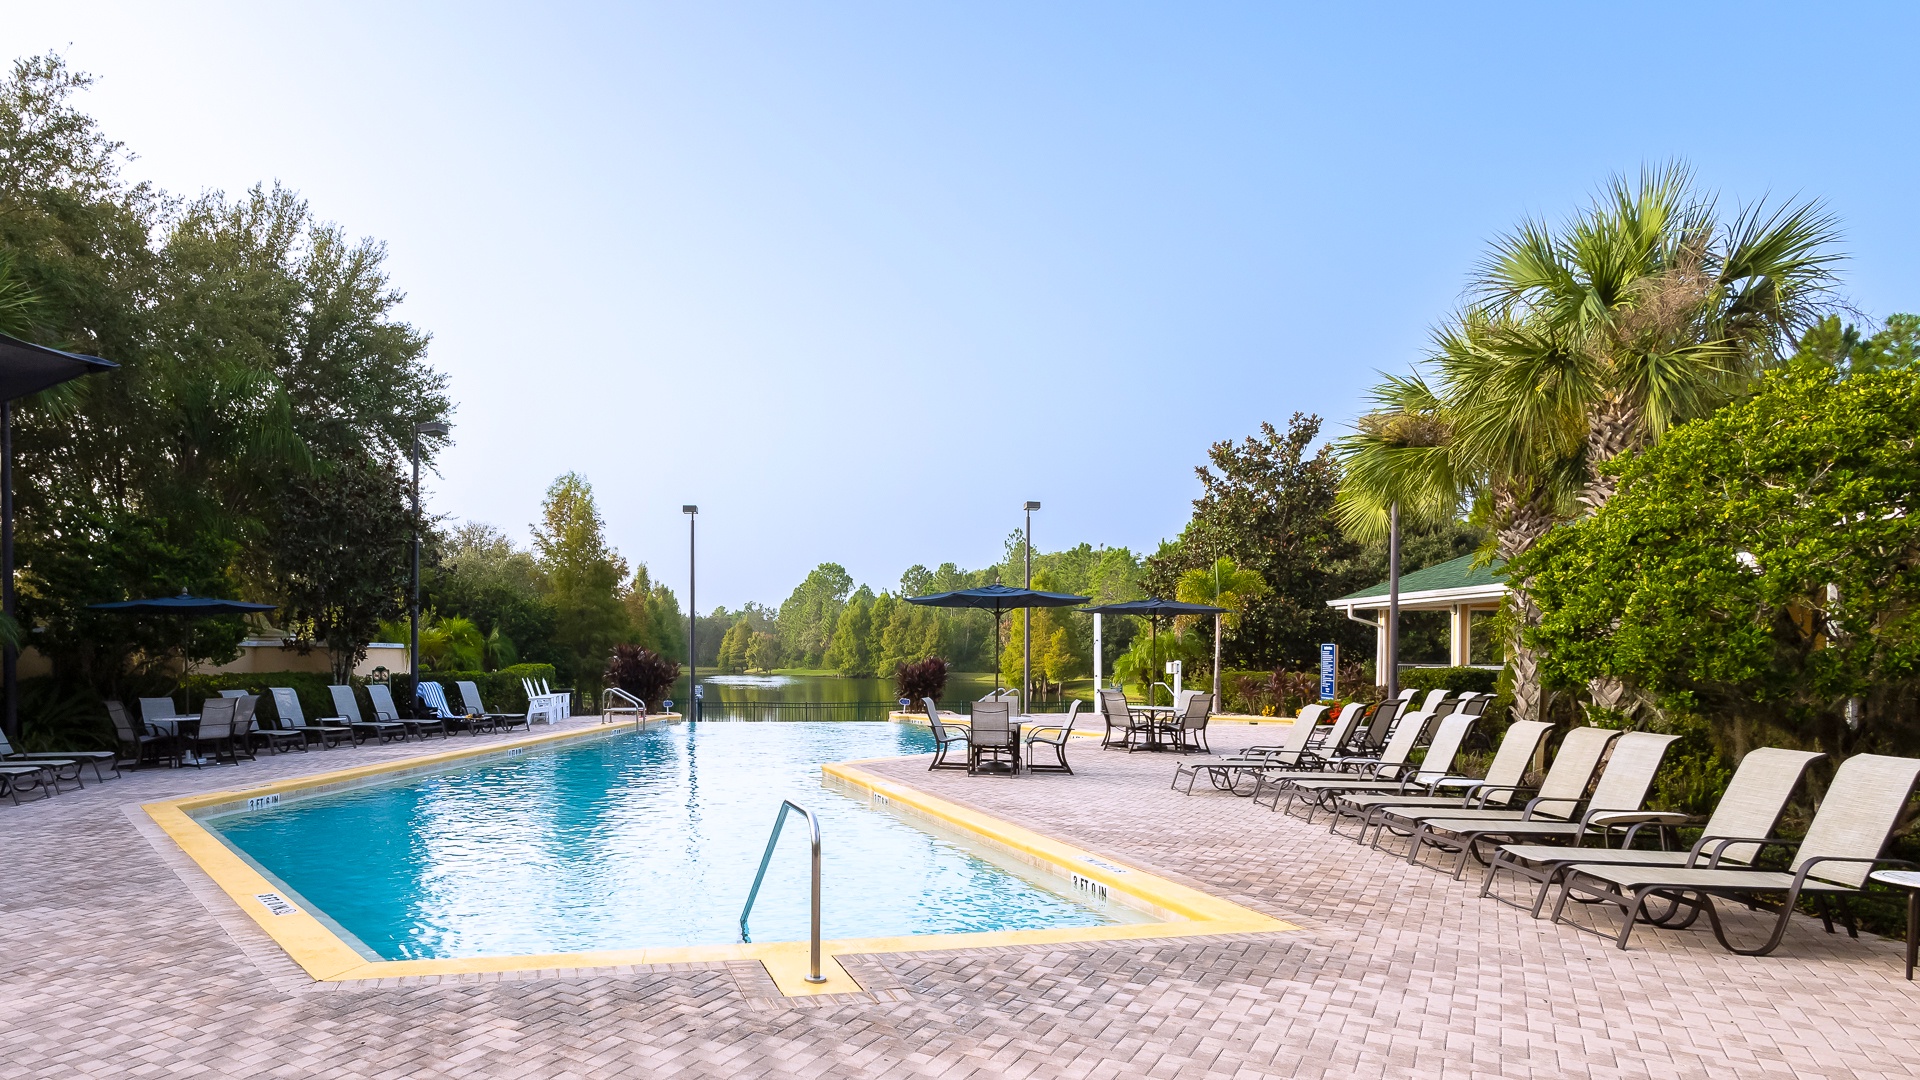 Lounge the day away or make a splash at the sparkling resort pool!